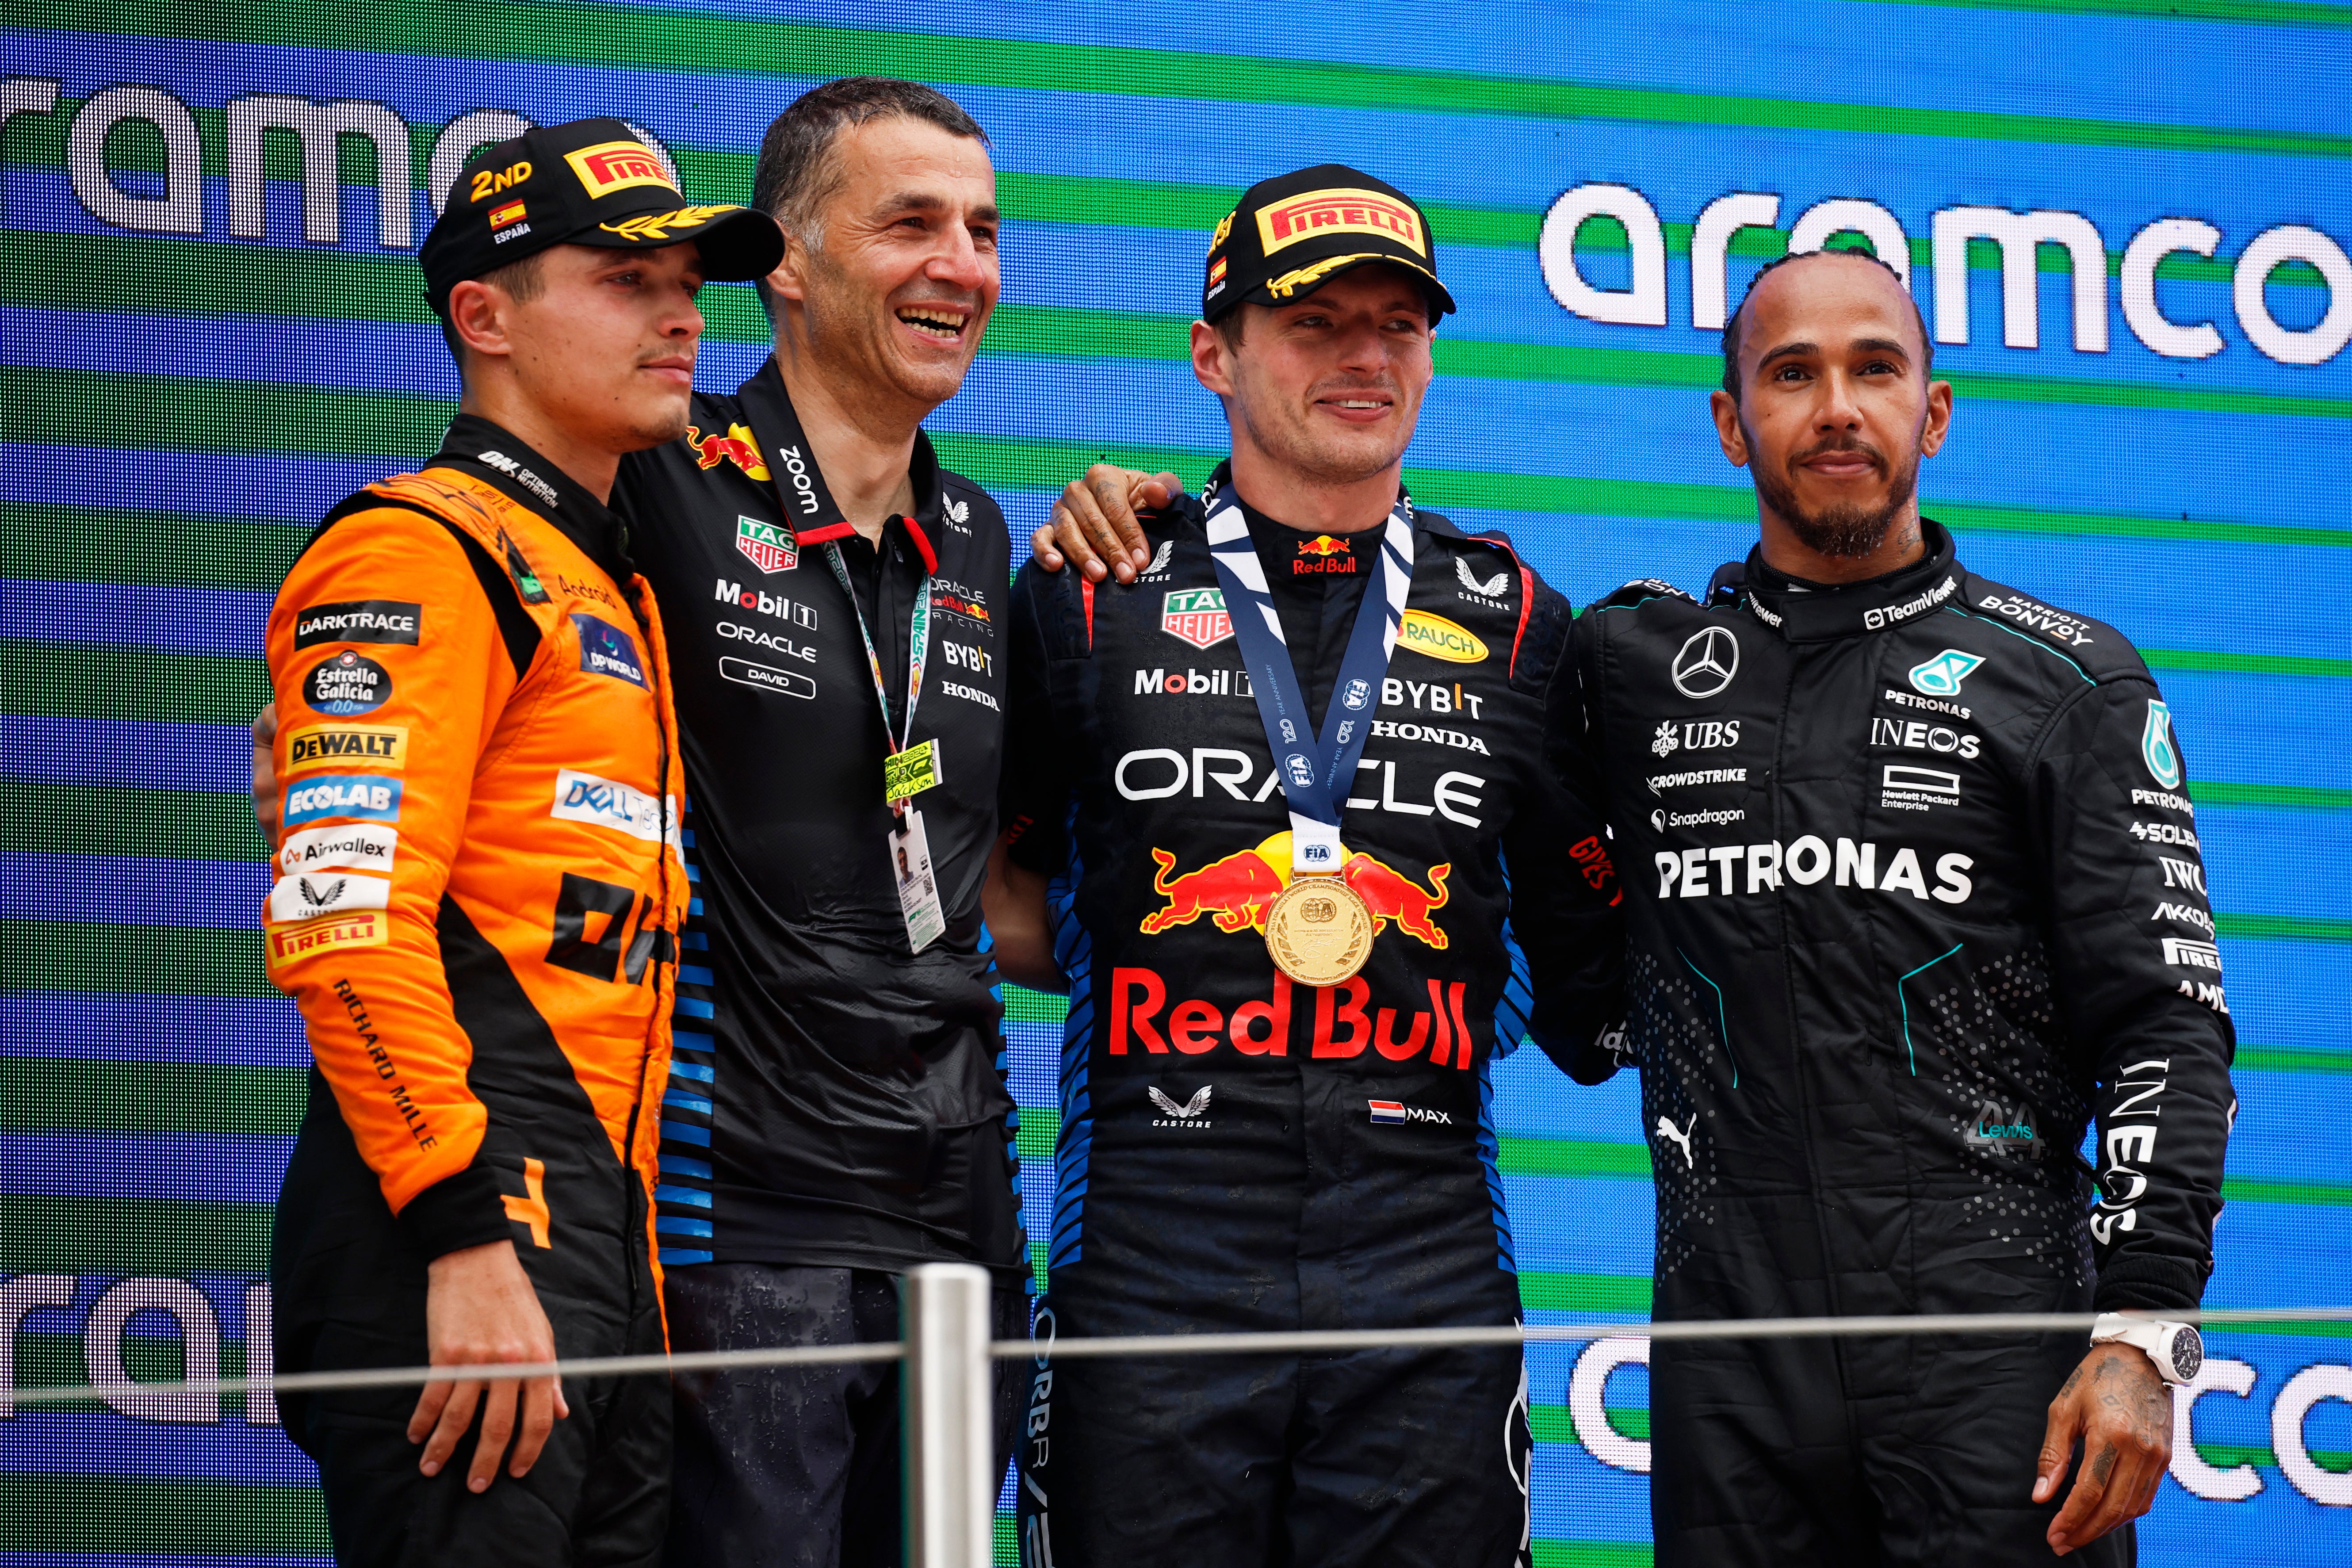 After starting on pole, Norris finished second behind Max Verstappen